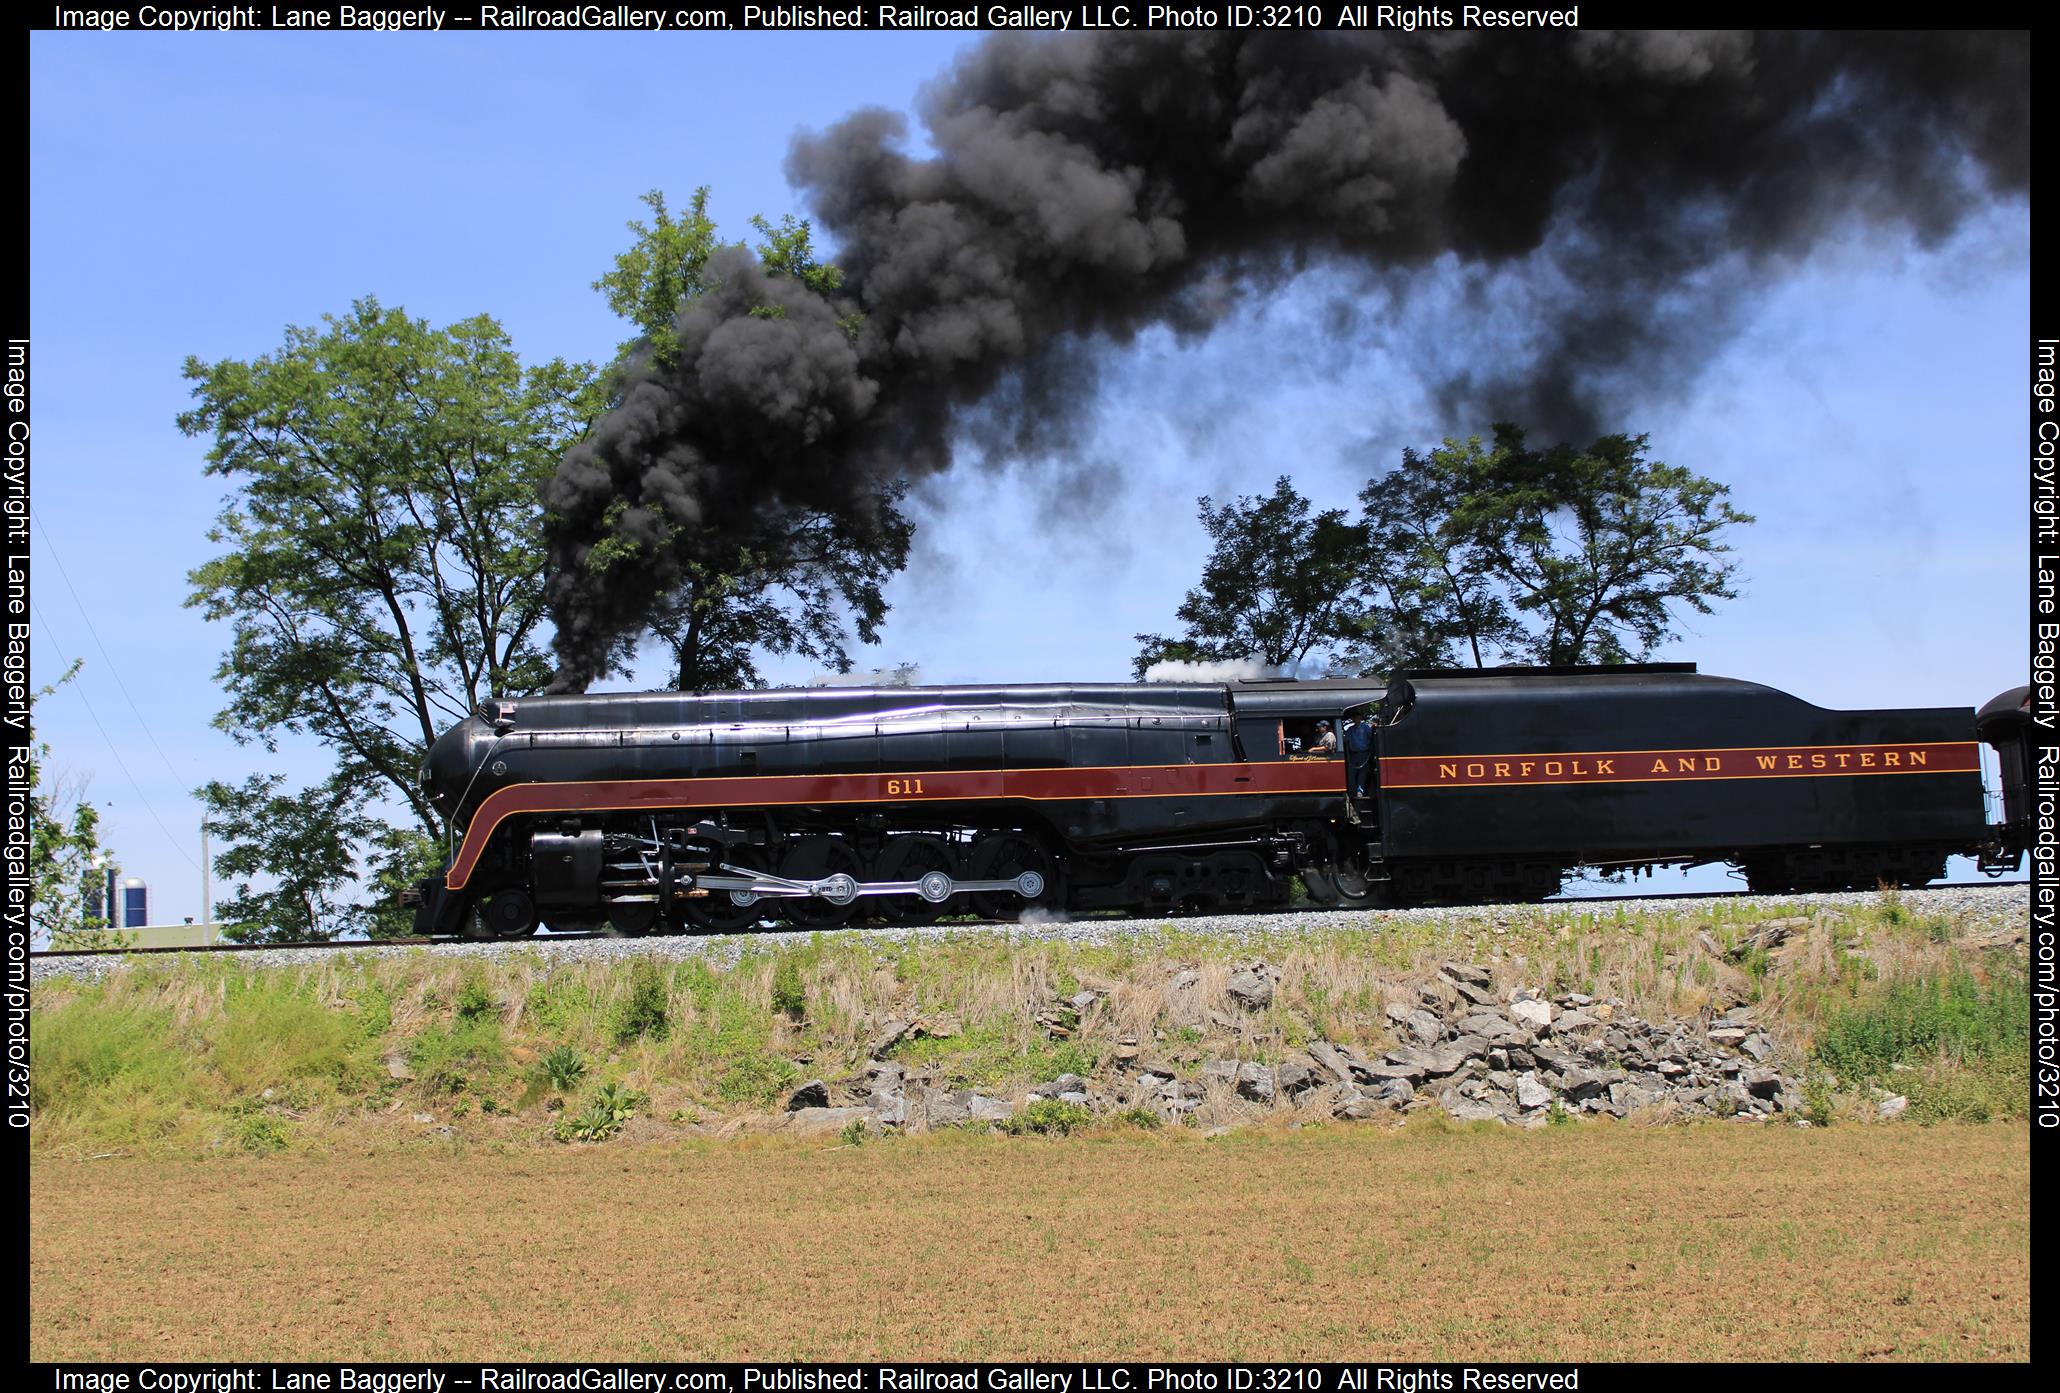 N&W 611 is a class 4-8-4 and  is pictured in Strasburg, Pennsylvania, United States.  This was taken along the SRC on the Strasburg Rail Road. Photo Copyright: Lane Baggerly uploaded to Railroad Gallery on 03/16/2024. This photograph of N&W 611 was taken on Saturday, May 27, 2023. All Rights Reserved. 